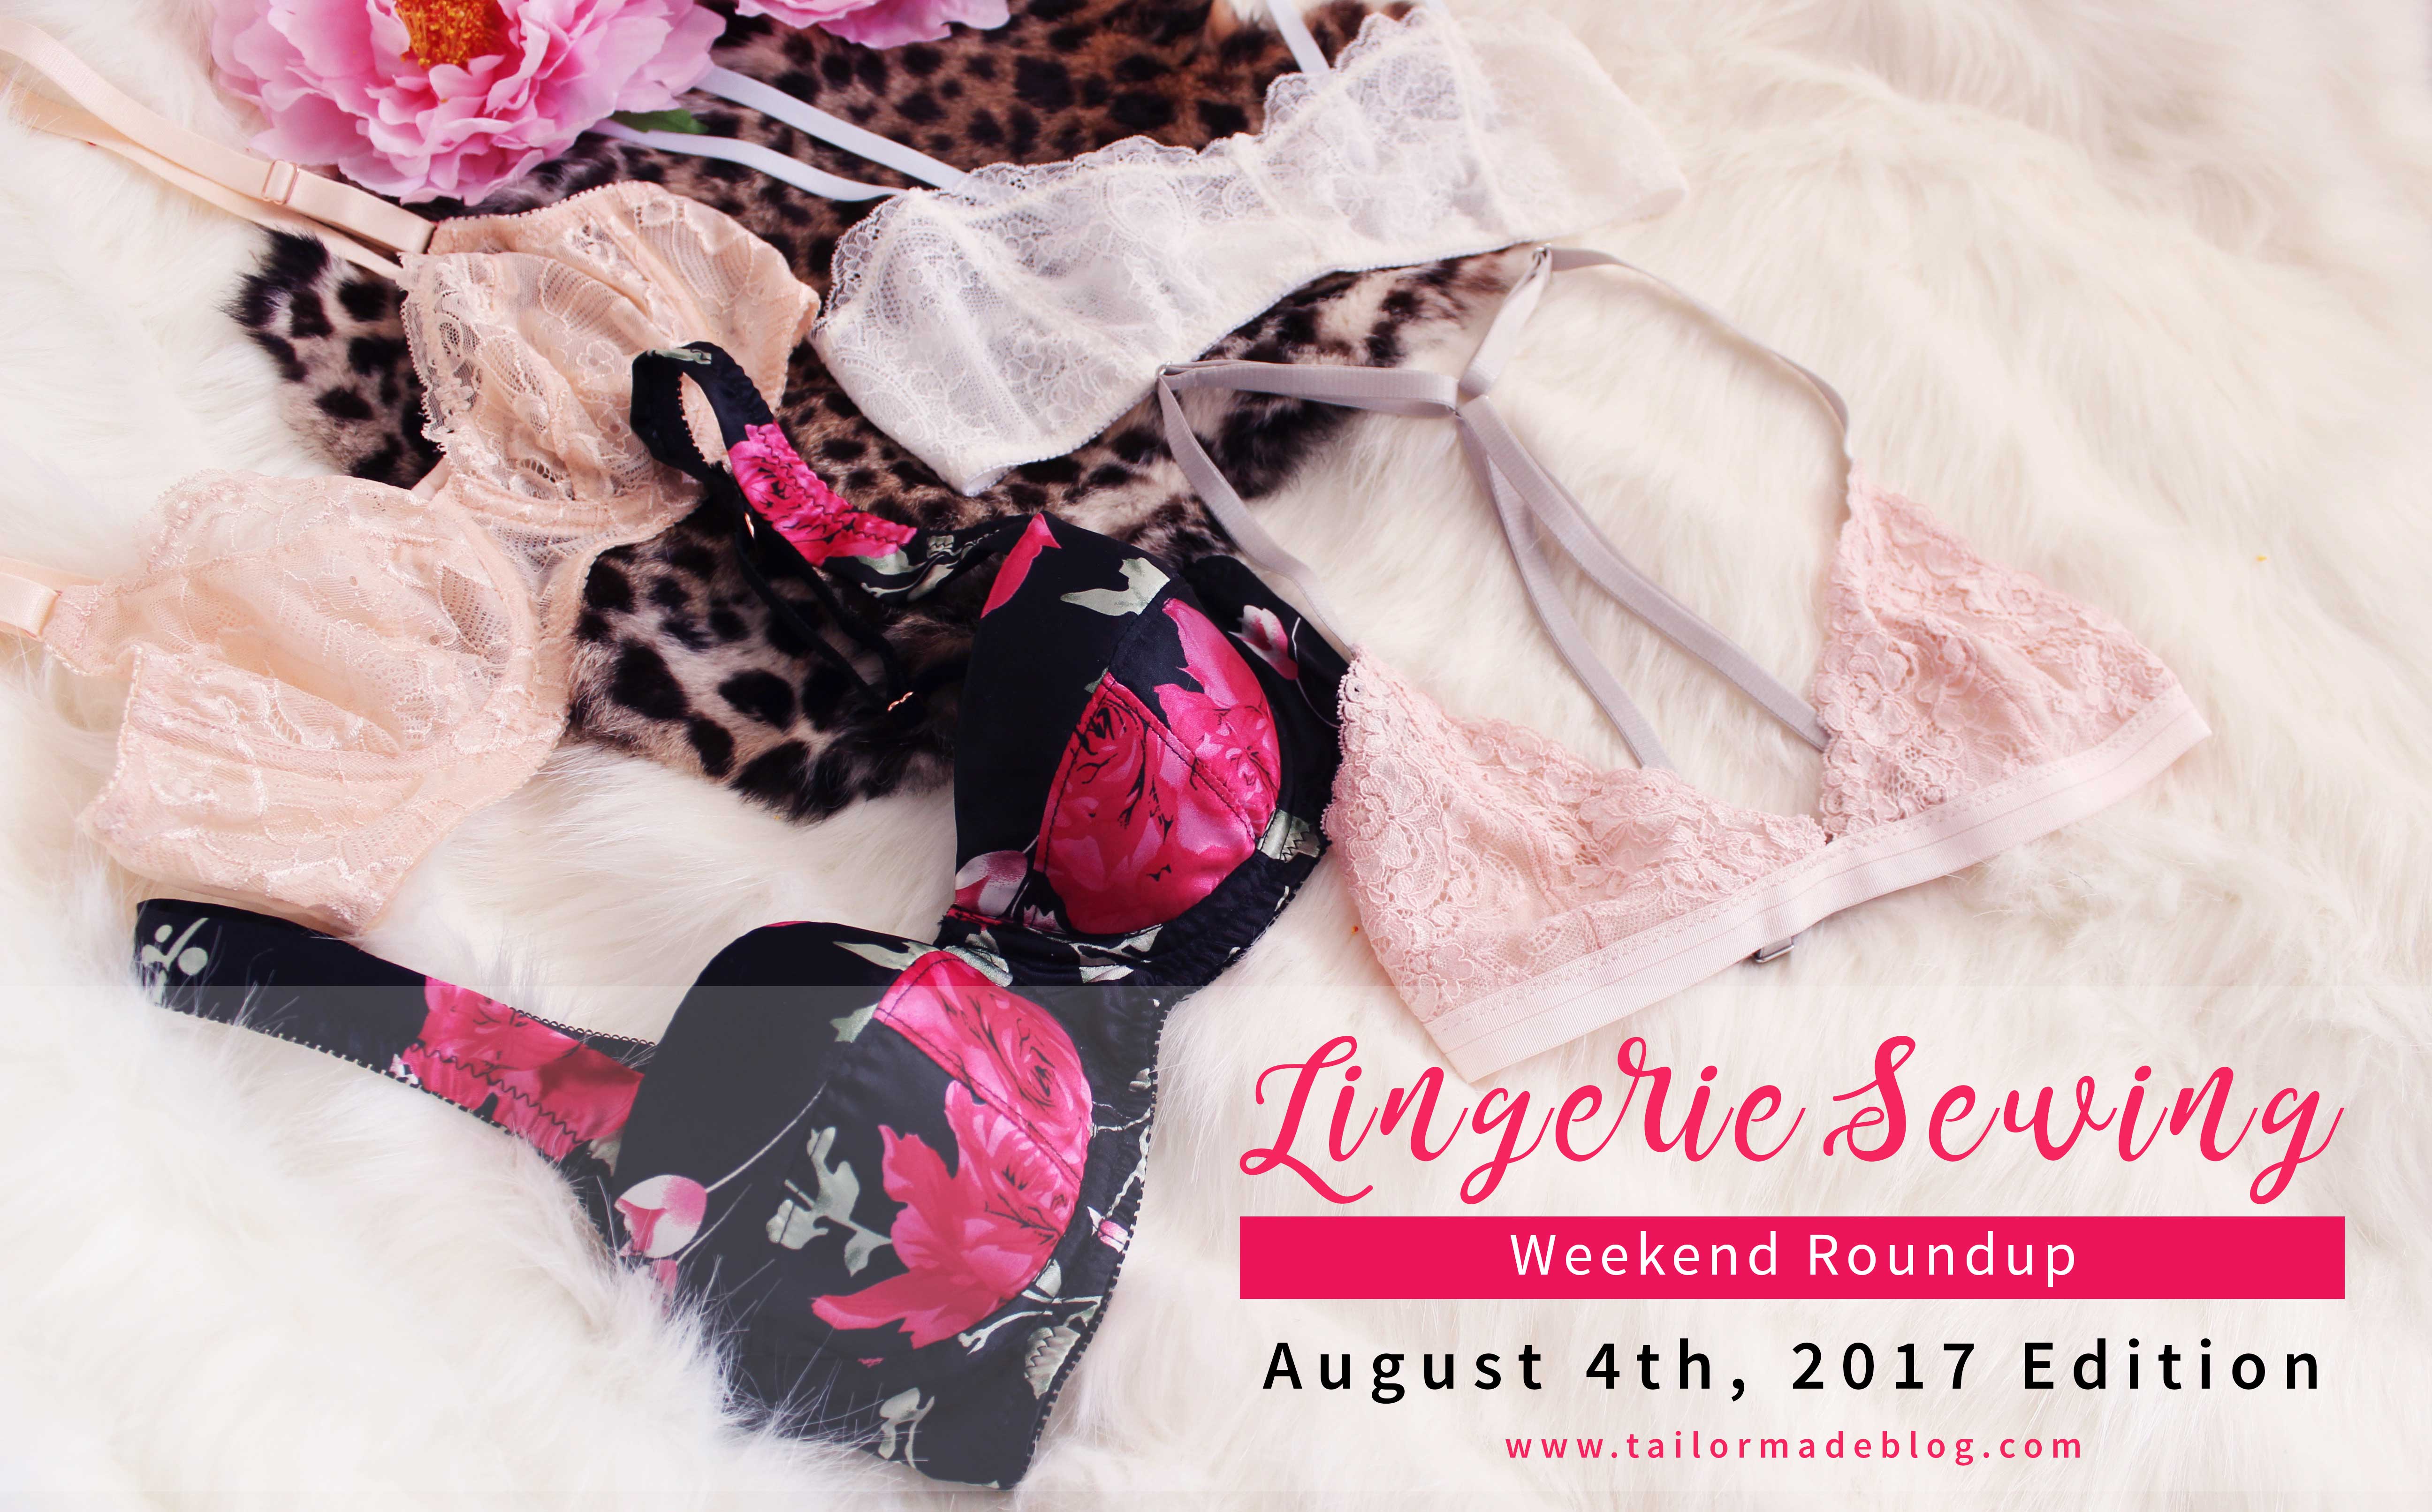 August 4th 2017 Lingerie Sewing Weekend Round Up Latest news and makes and sewing projects from the lingerie sewing bra making community